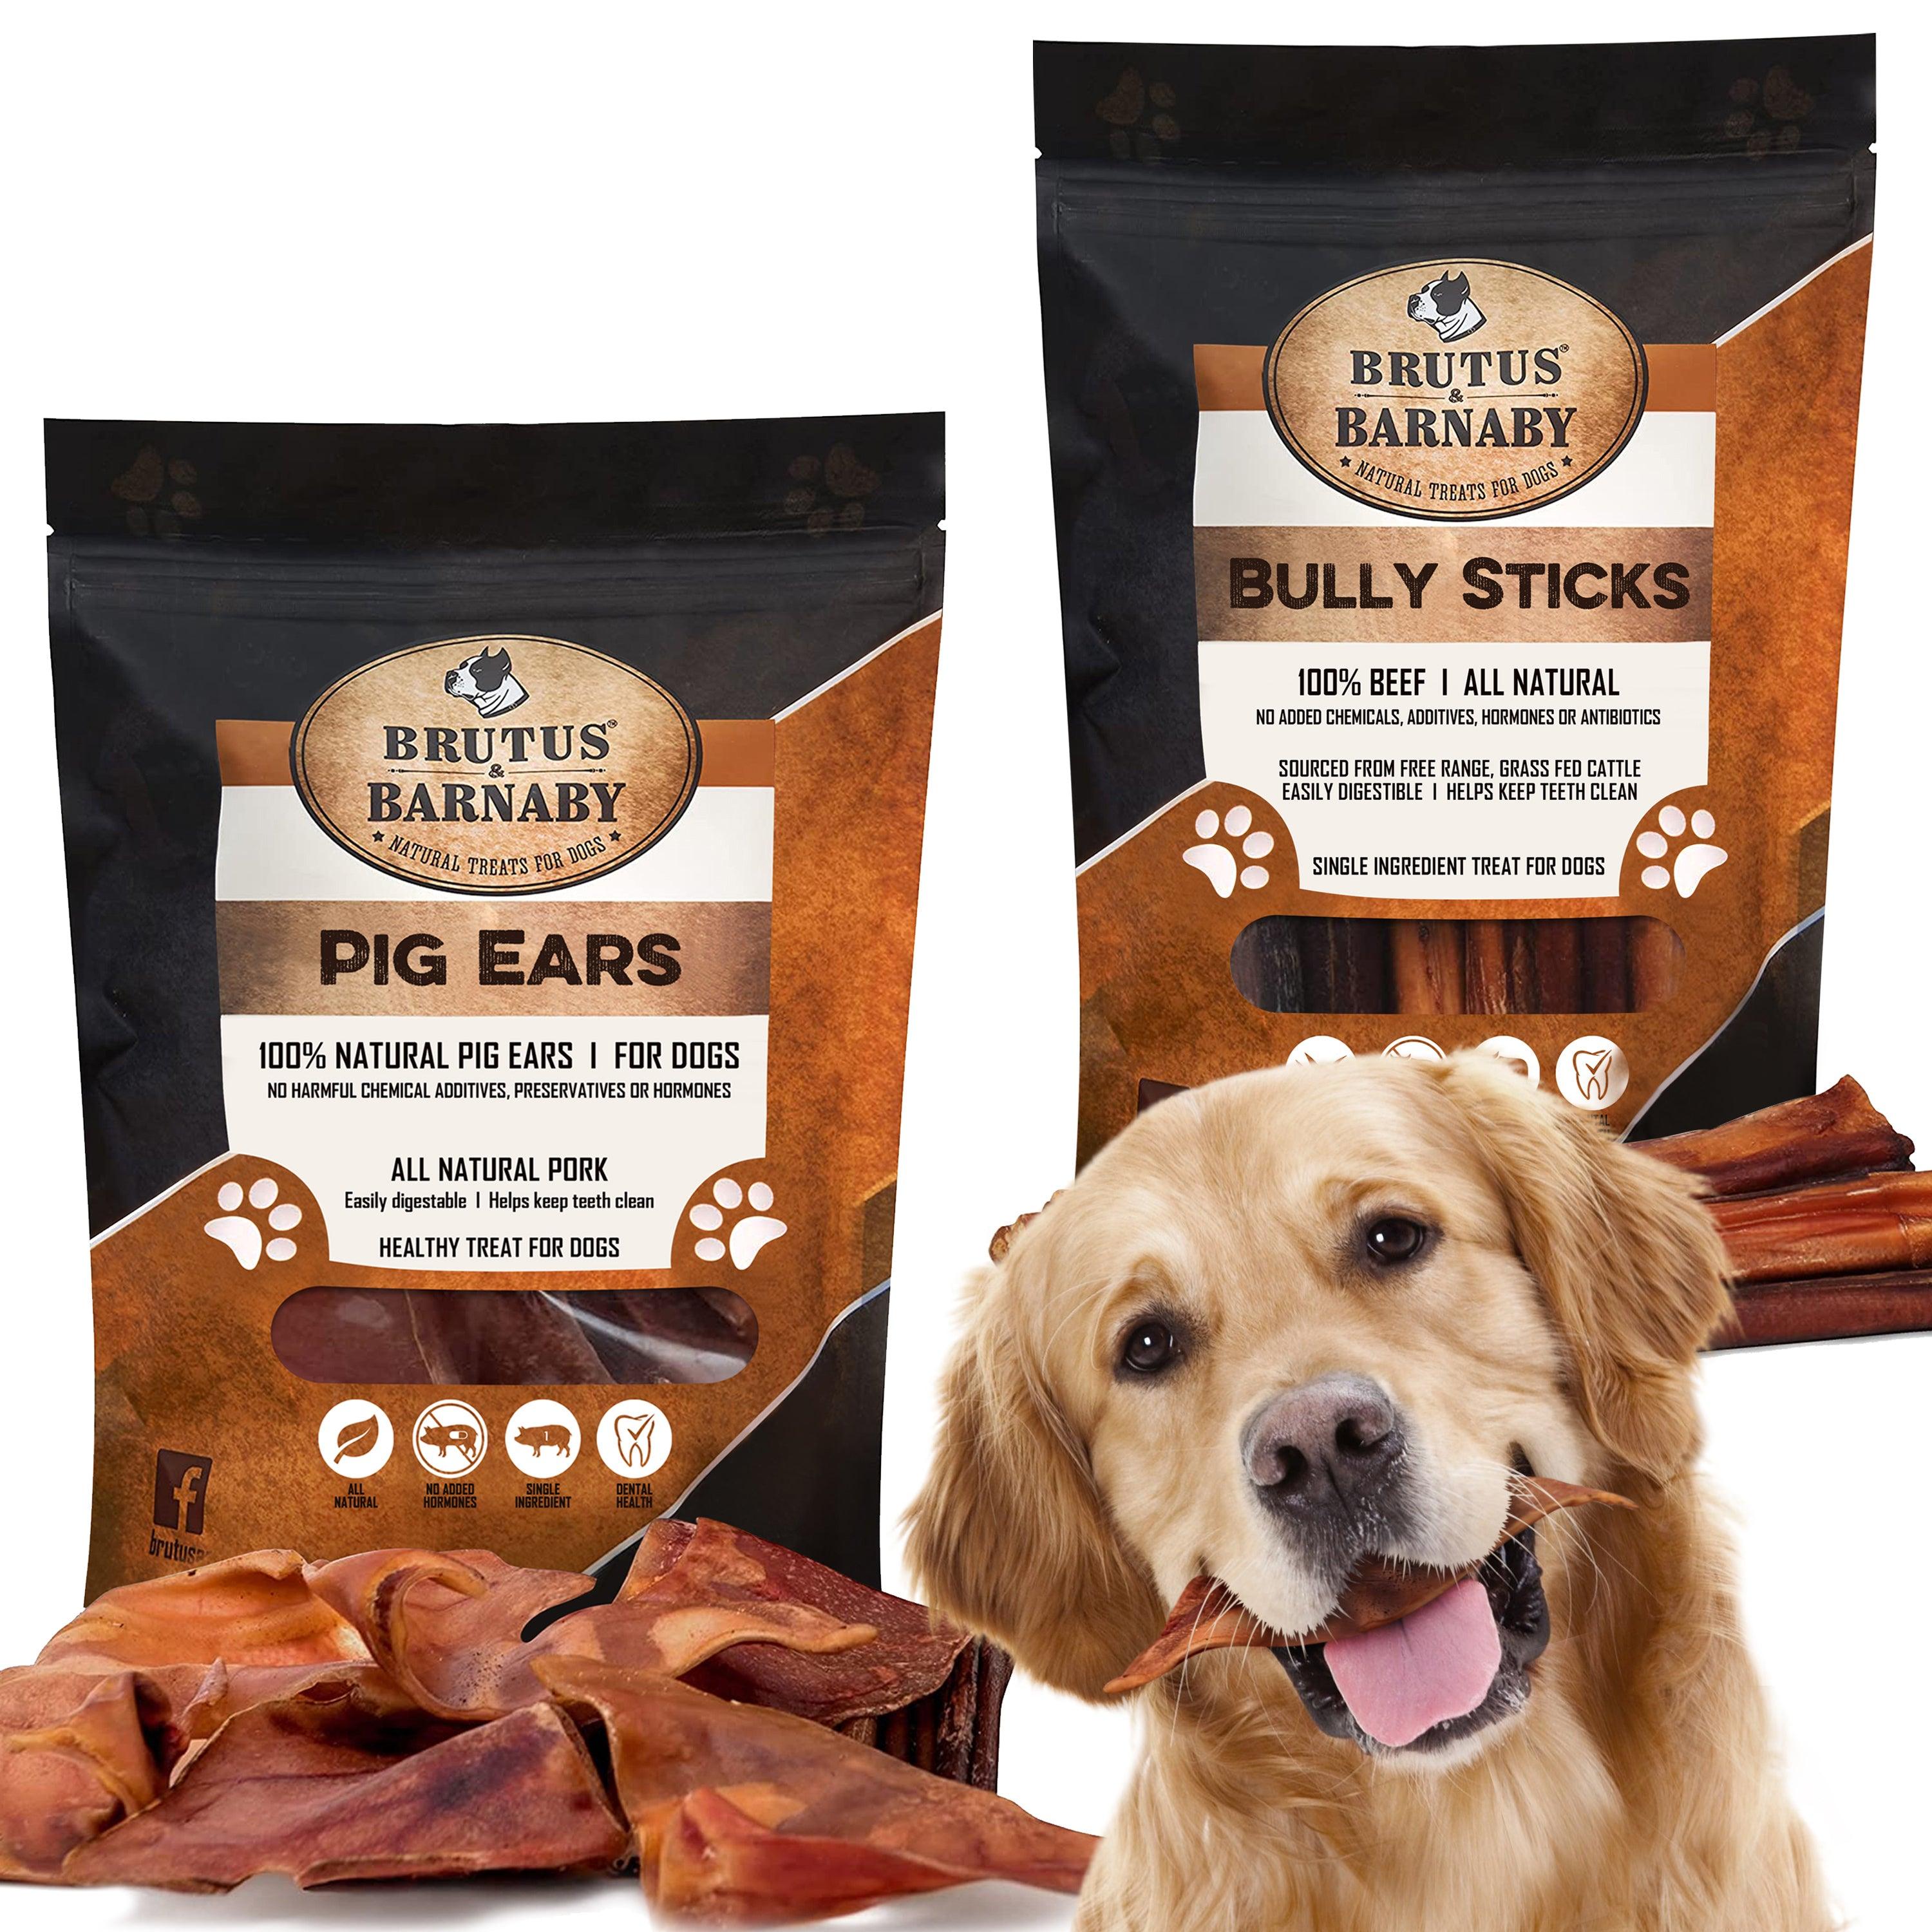 12 Whole Pig Ears + 12 Bully Sticks for Dogs - Brutus & Barnaby